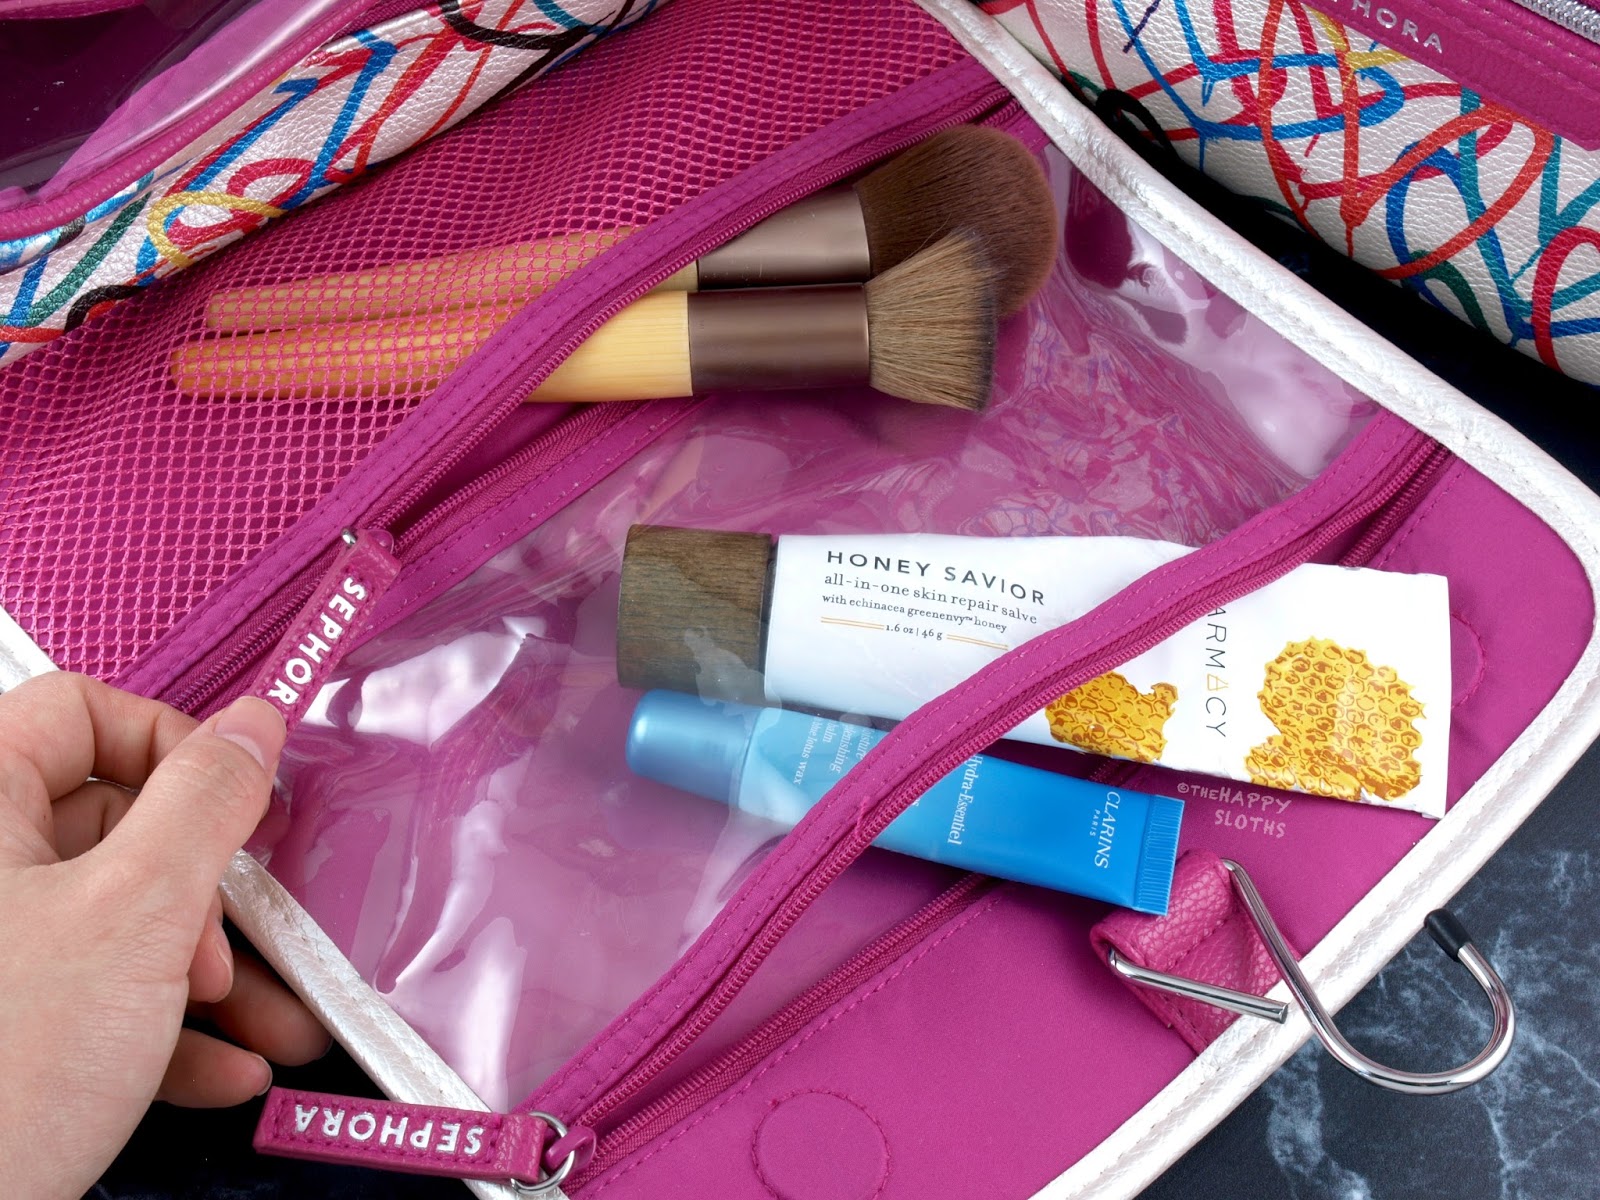 Sephora Collection | J Goldcrown Bleeding Hearts Makeup Bag Collection | The Overpacker: Review 